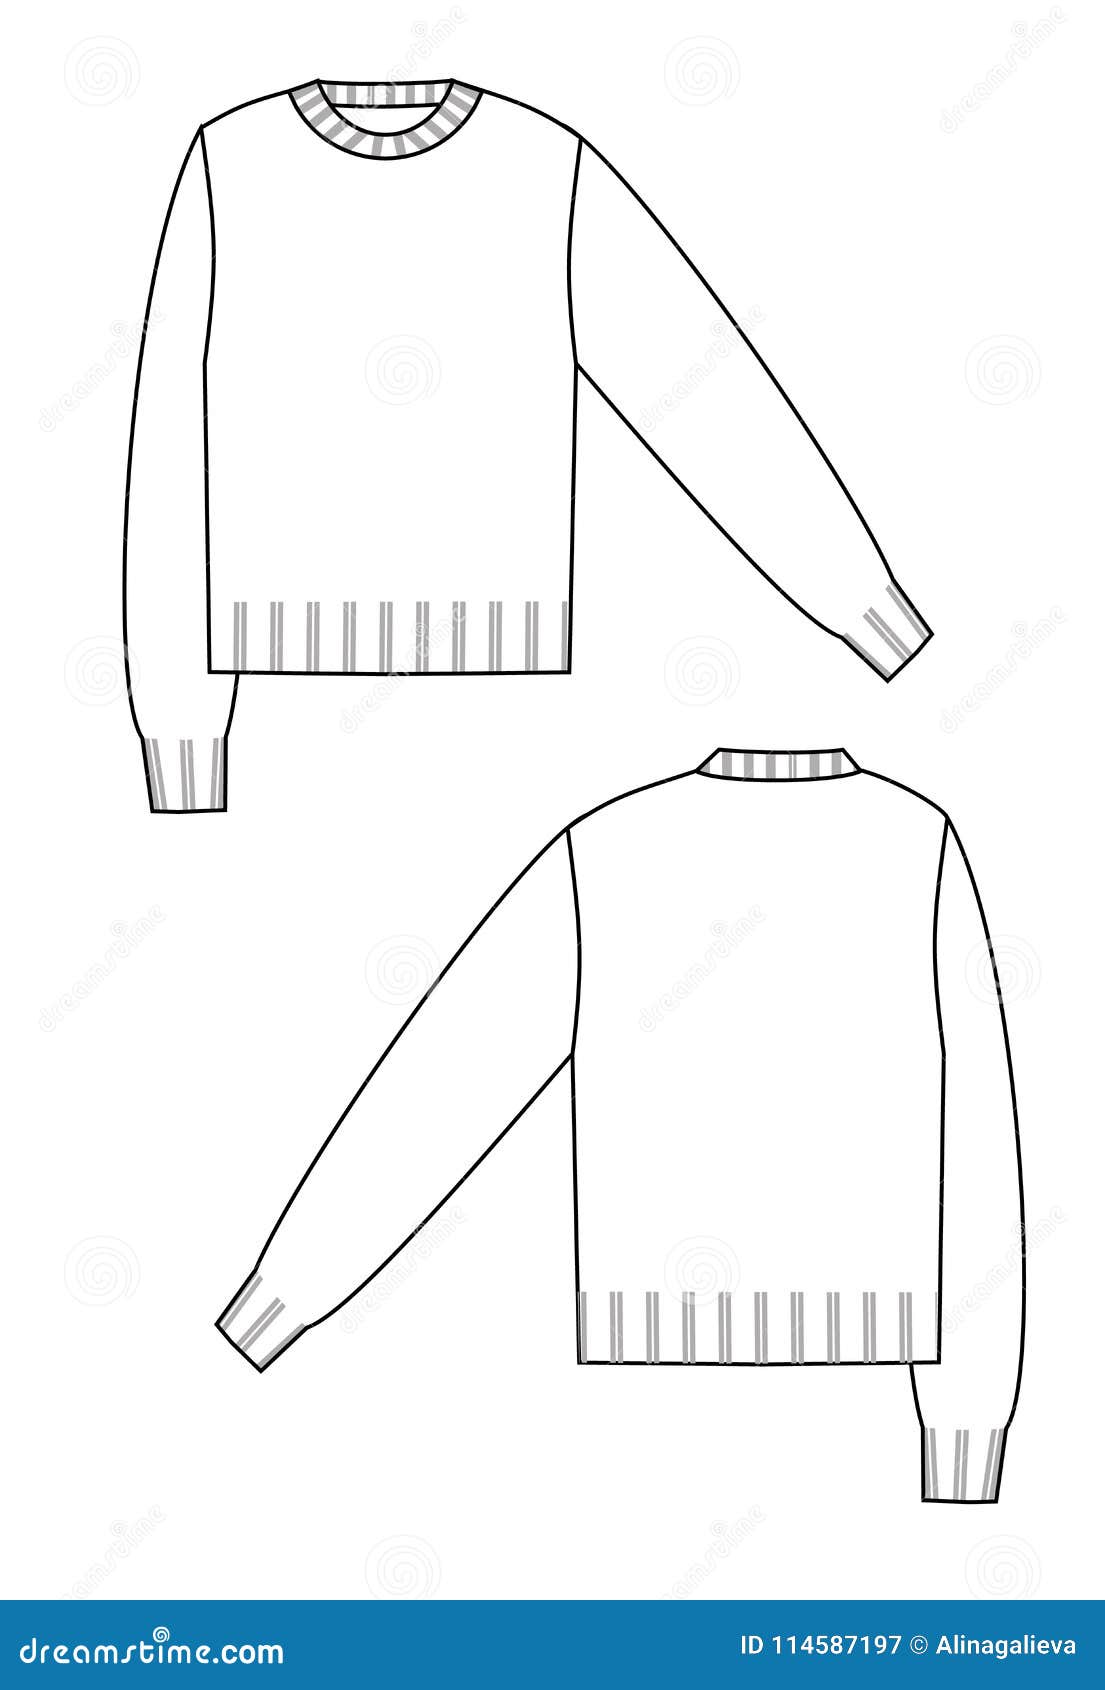 Sweater technical sketch stock vector. Illustration of knit - 114587197